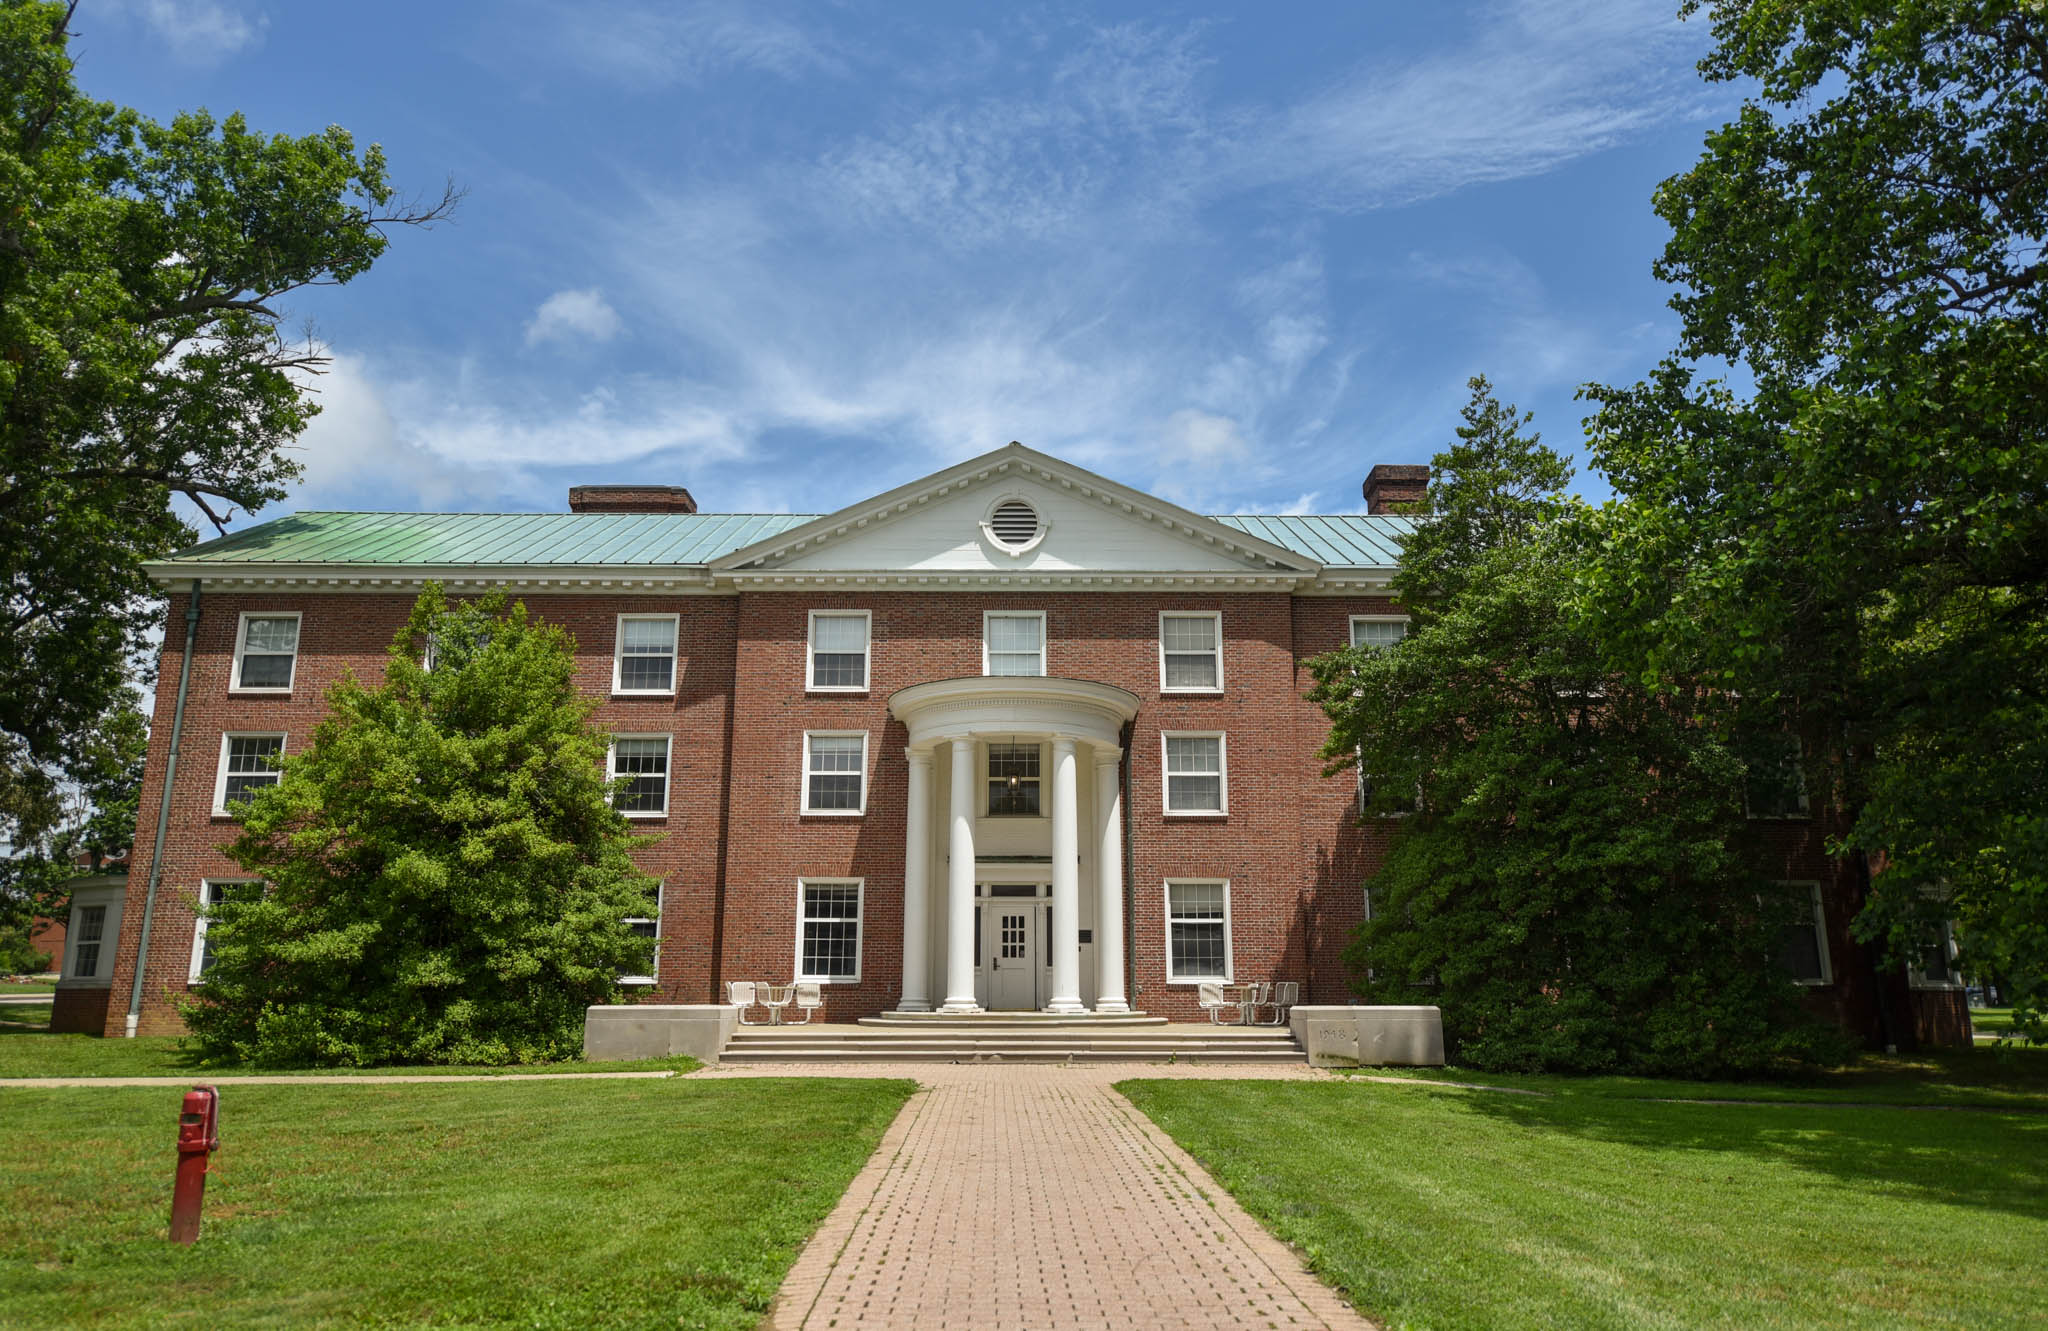 Crowe Hall at Hanover College